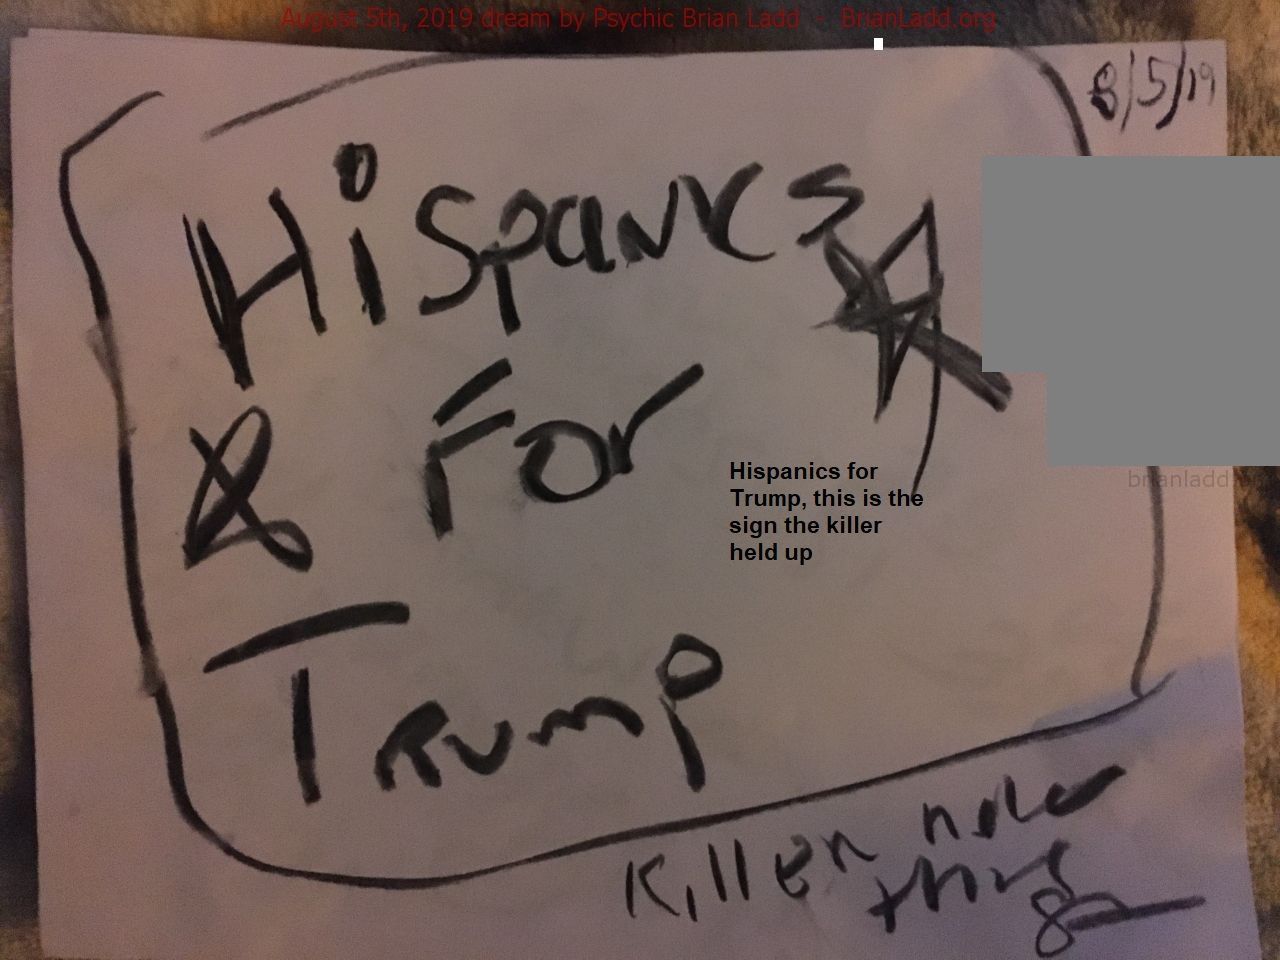 12065 5 August 2019 1 - Hispanics For Trump, This Is The Sign The Killer Held Up, Way More To This From 2018  By Trump!!...
Hispanics For Trump, This Is The Sign The Killer Held Up, Way More To This From 2018  By Trump!! Who I Really Love.
